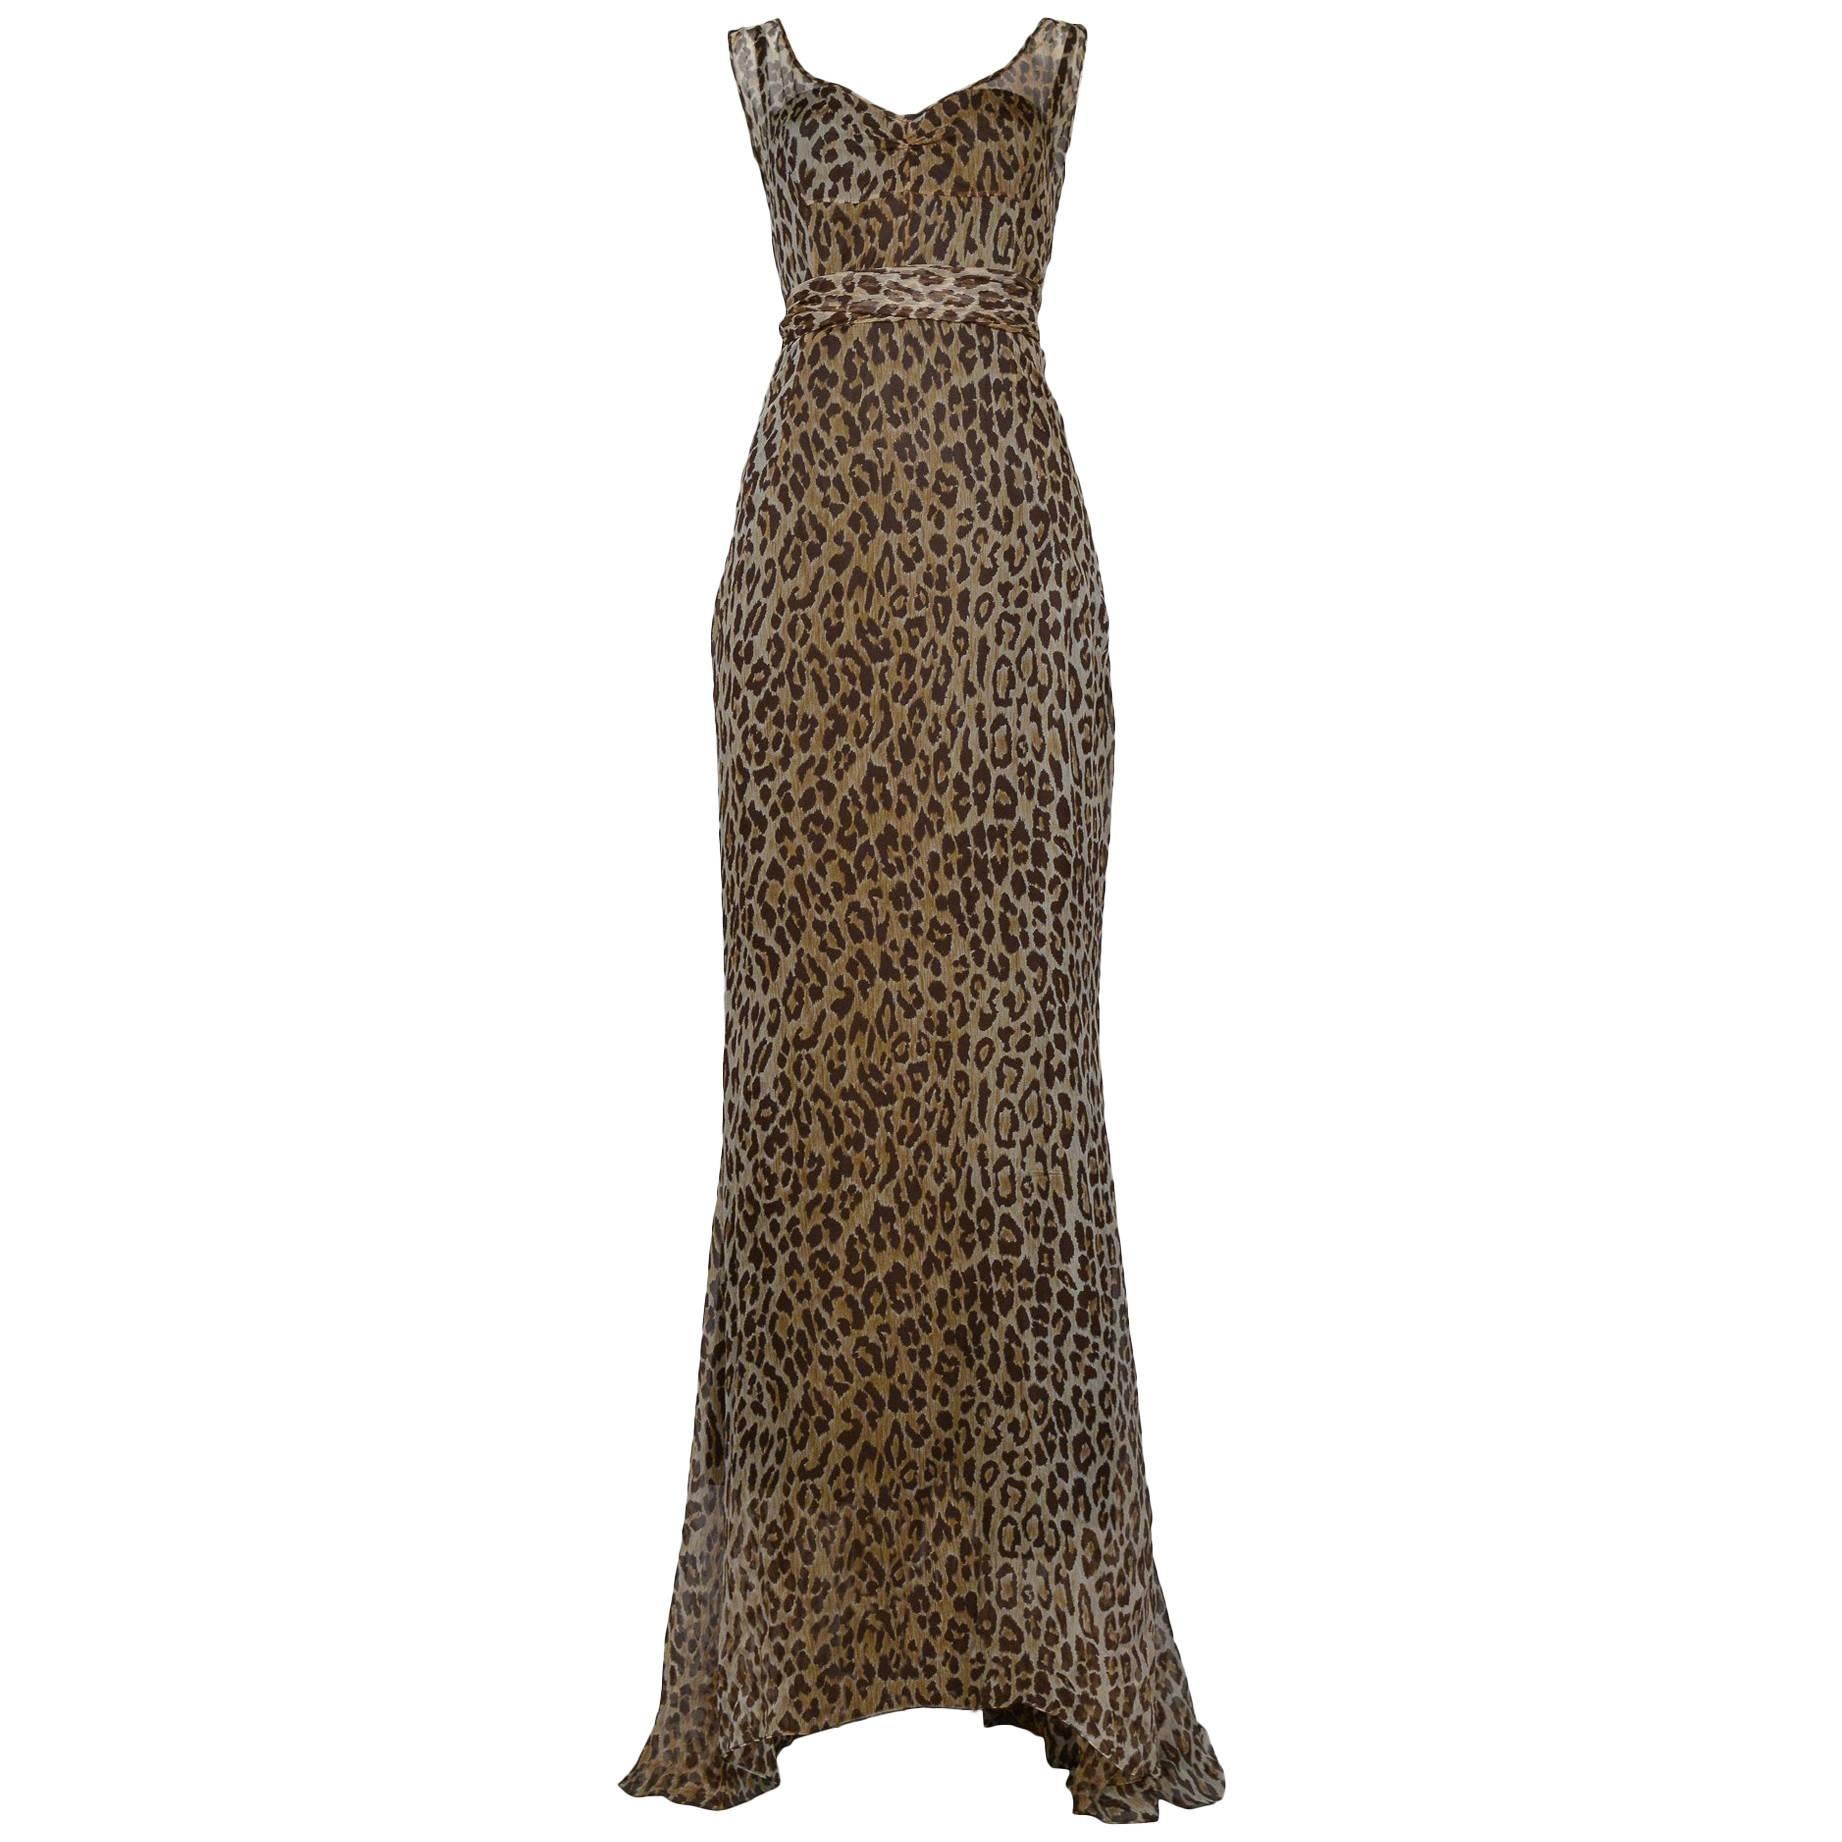 Dolce & Gabbana Leopard Print Statement Evening Gown with Train and Sash